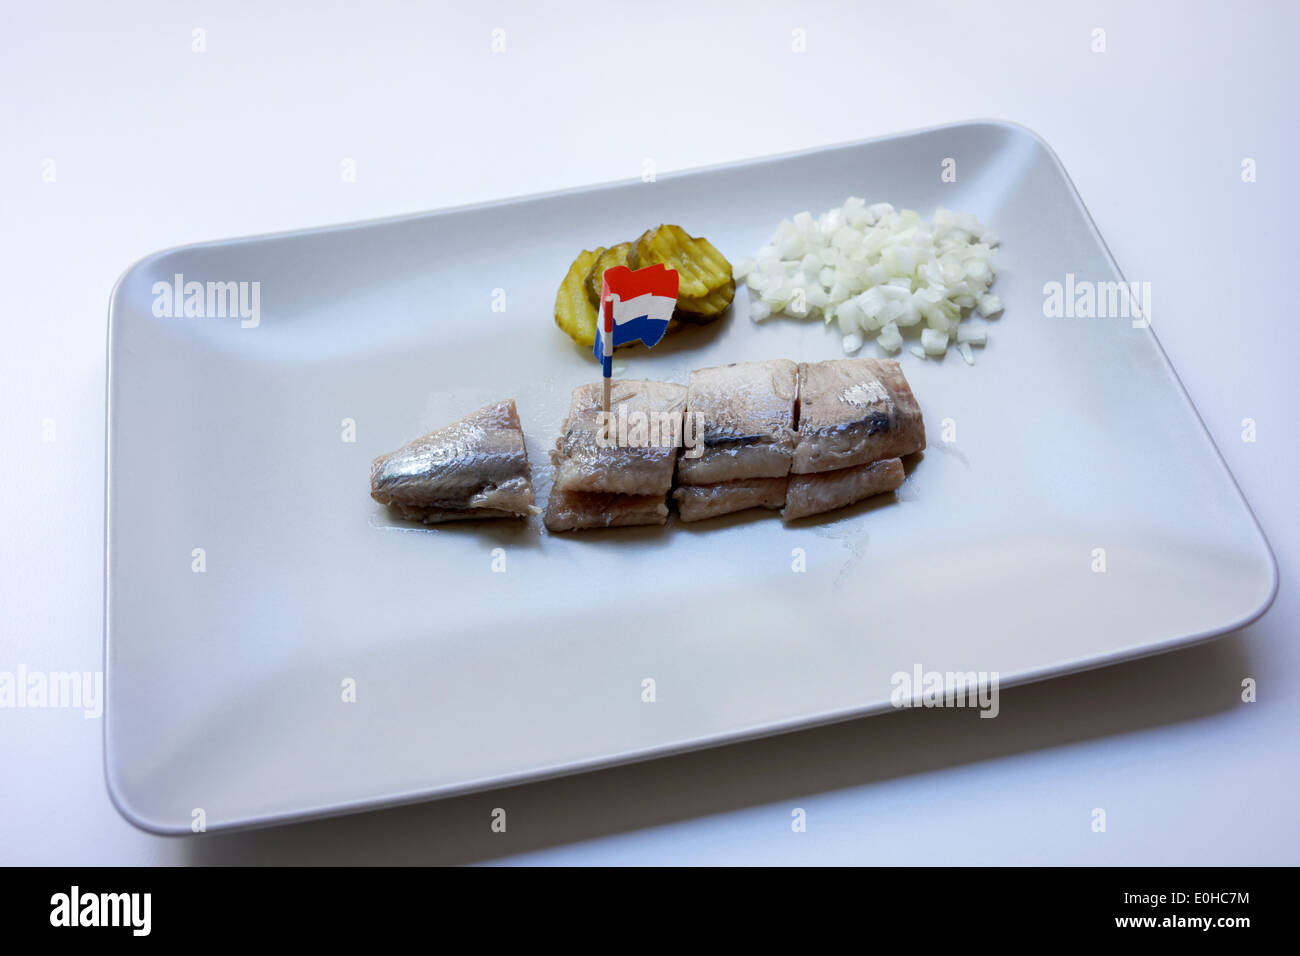 A soused herring, known as Maatjesharing served on a plate in Amsterdam, Holland. Stock Photo